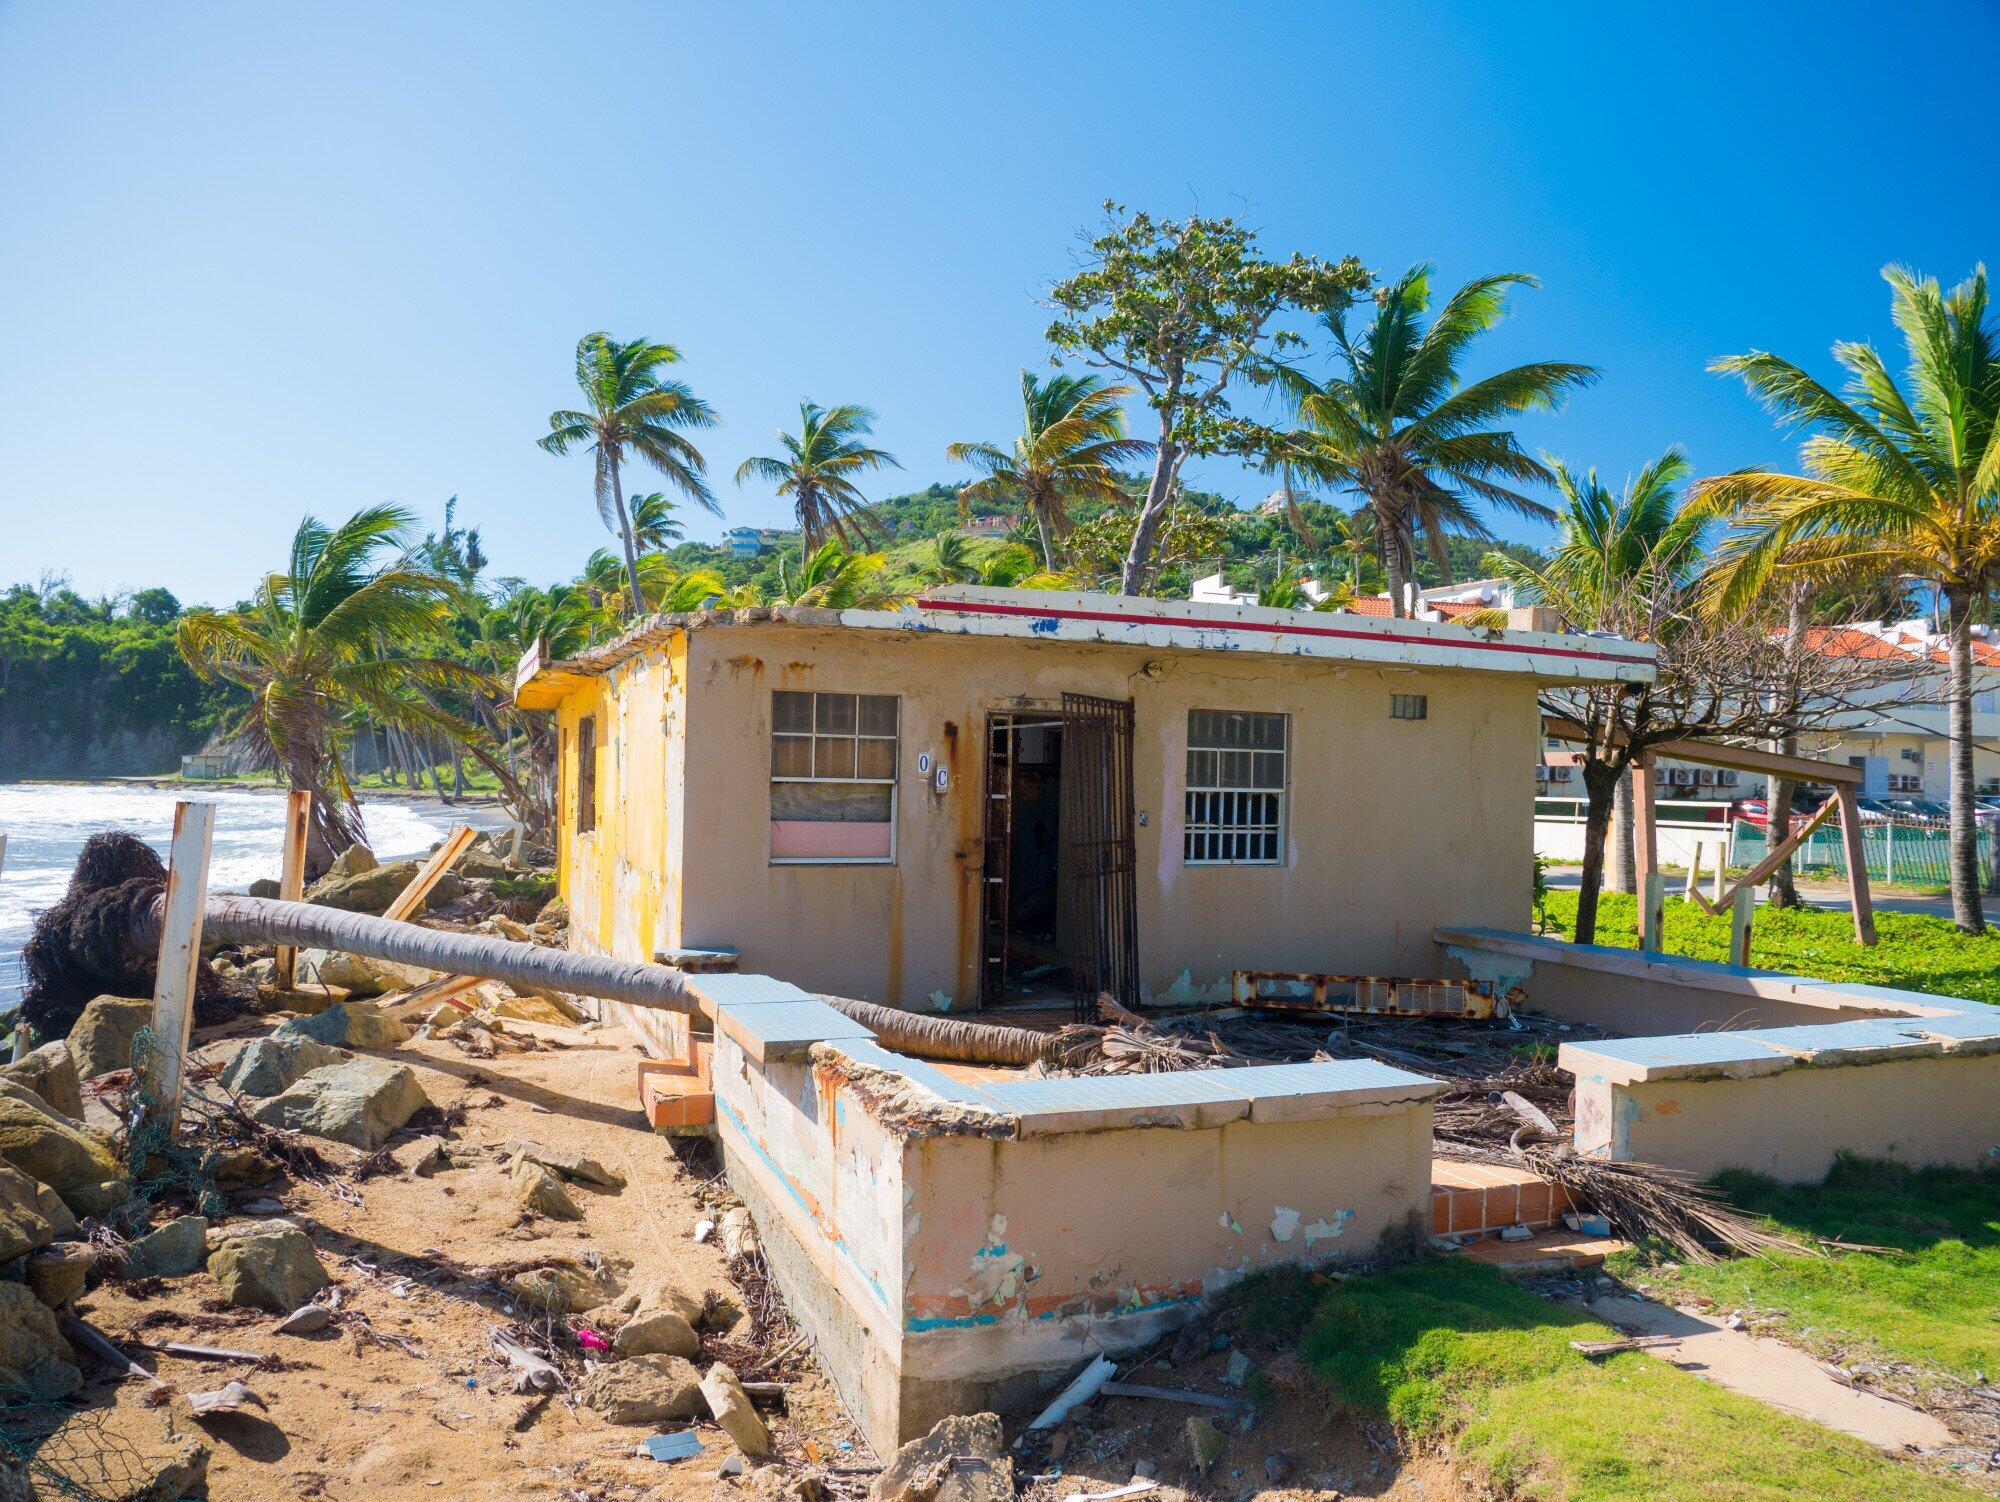 Common Insurance Claim Problems as an Absentee Owner After a Hurricane